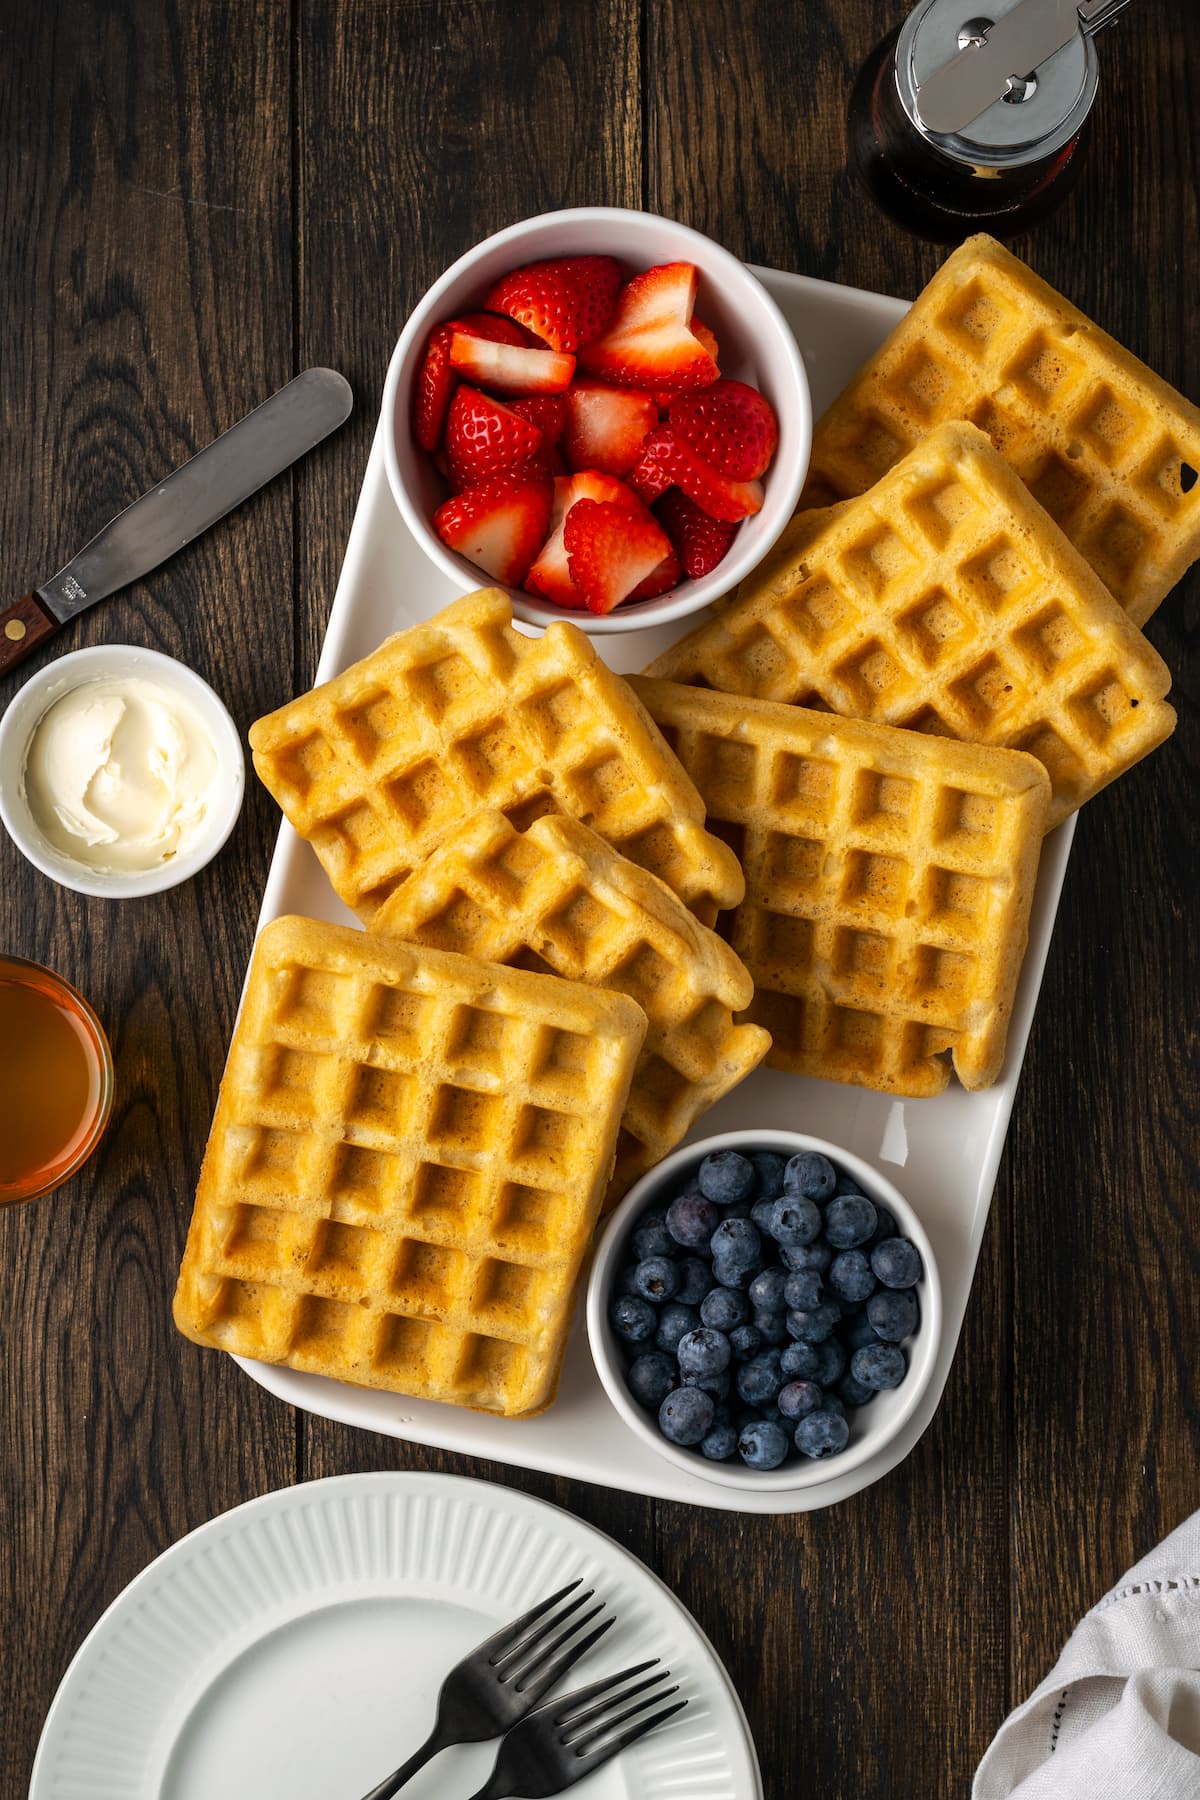 Overhead view of a platter of waffles served with bowls of blueberries and strawberries.